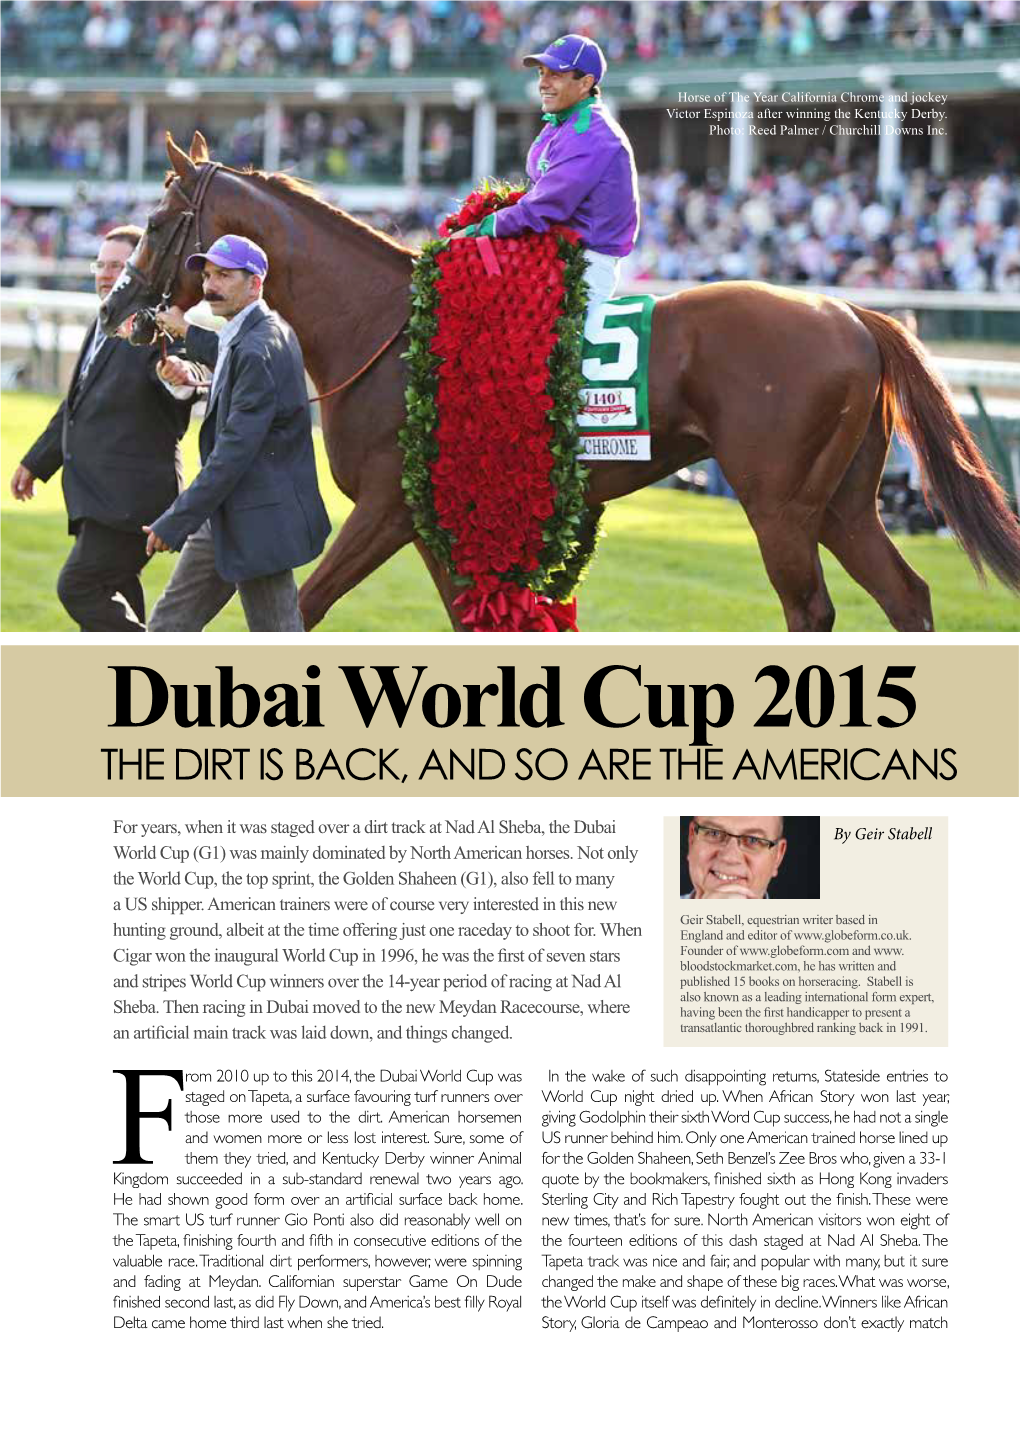 Dubai World Cup 2015 the DIRT IS BACK, and SO ARE the AMERICANS